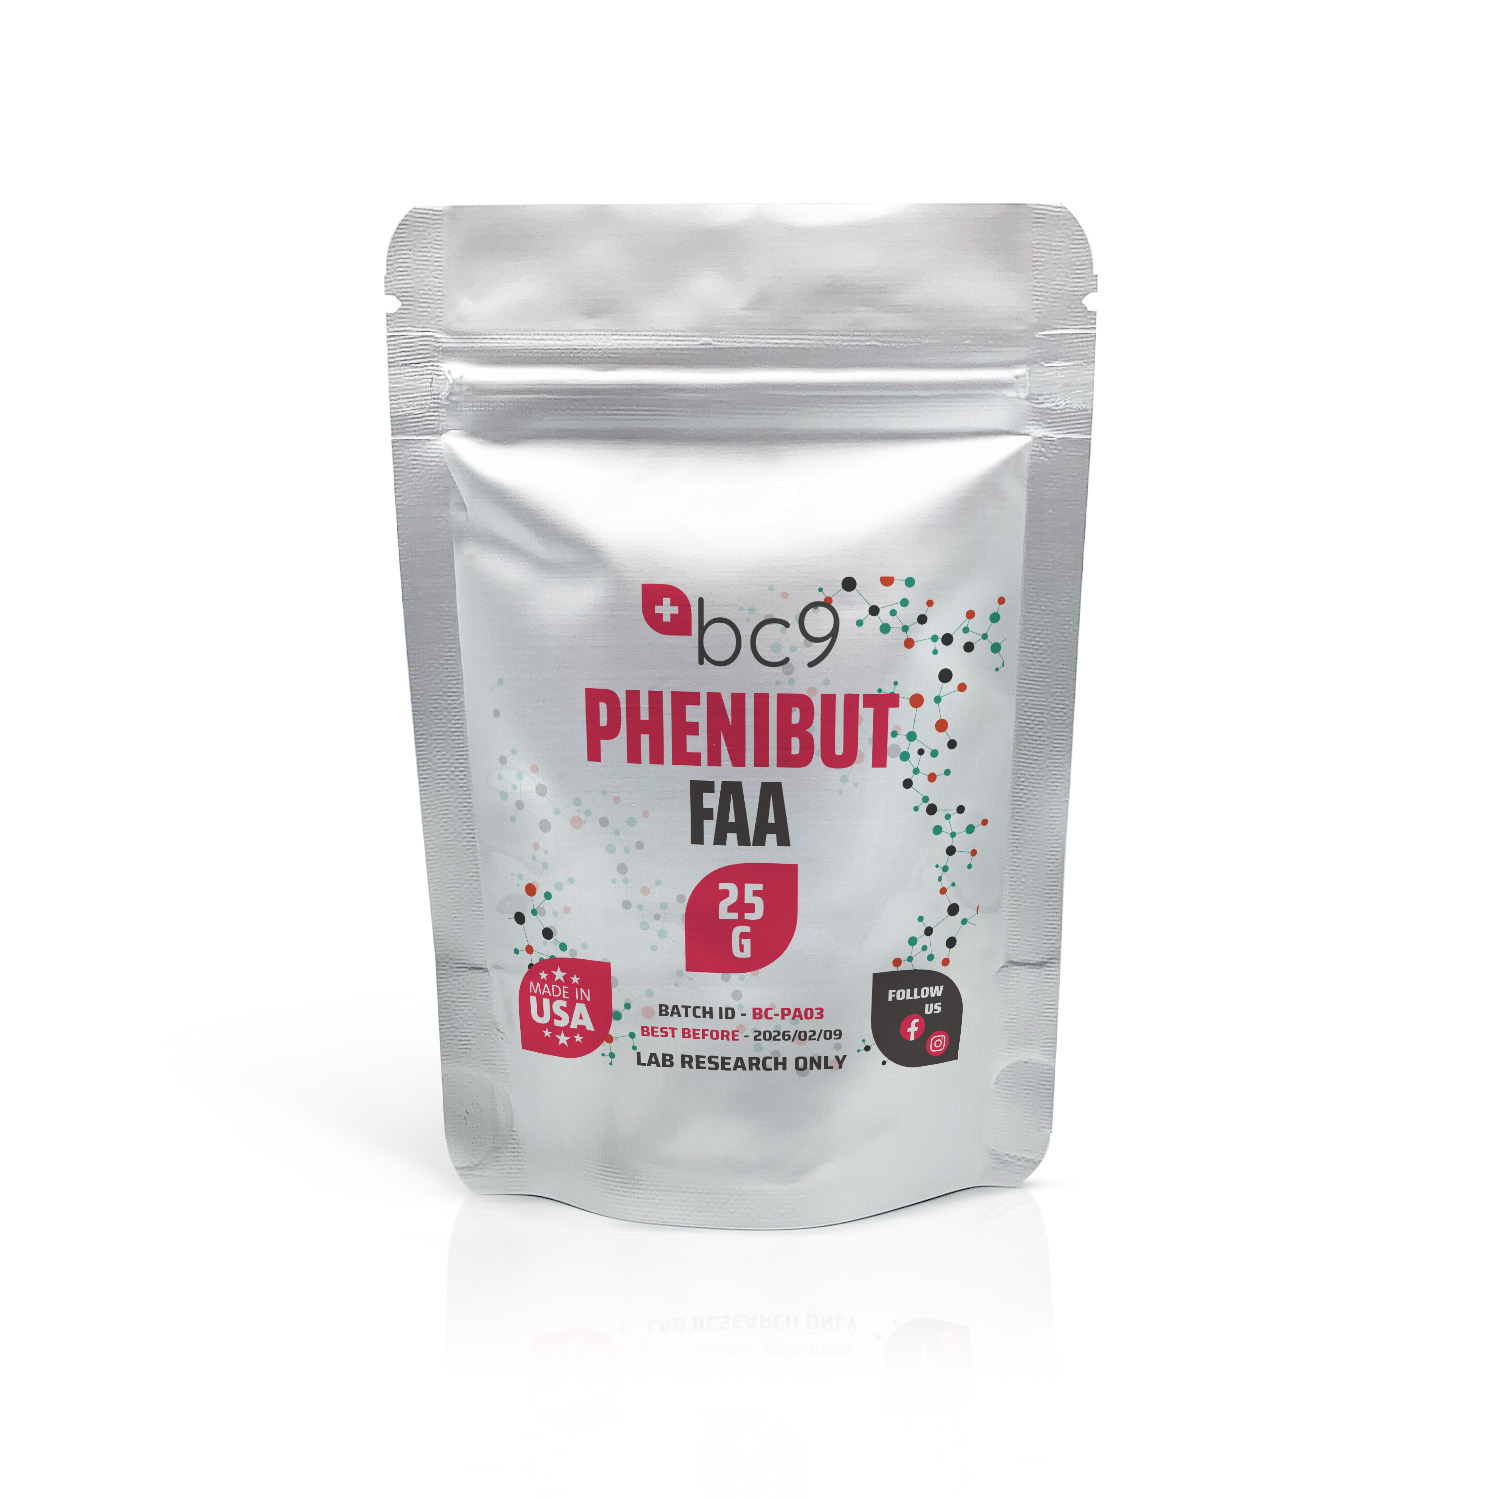 Phenibut FAA Powder For Sale | Fast Shipping | BC9.org